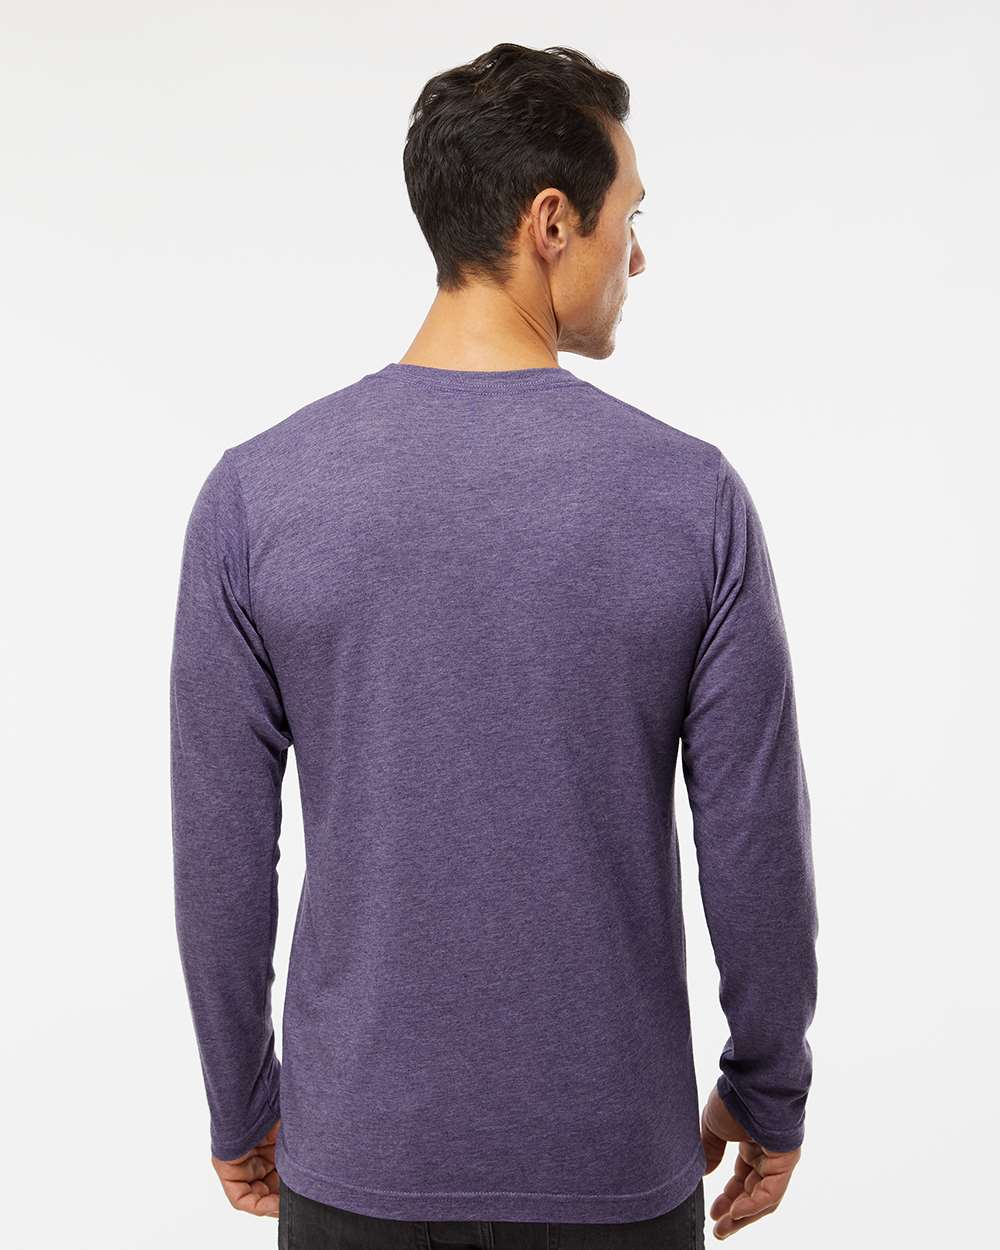 M&O Poly-Blend Long Sleeve T-Shirt 3520 #colormdl_Heather Purple